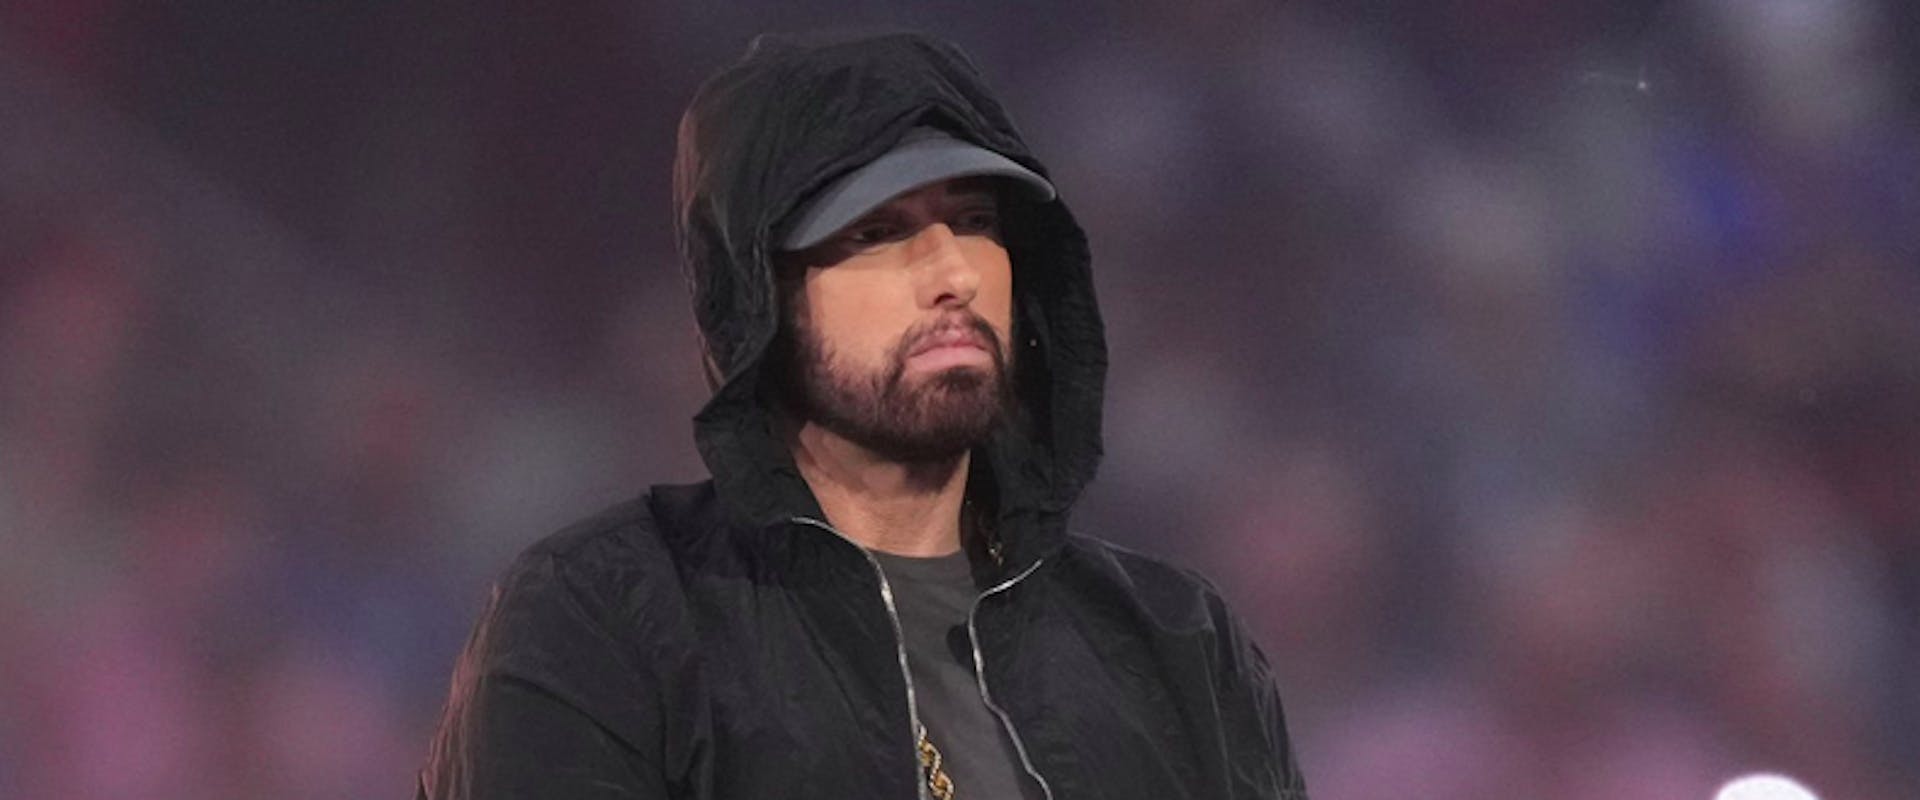 NGLEWOOD, CALIFORNIA - FEBRUARY 13: Eminem performs in the Pepsi Halftime Show during the NFL Super Bowl LVI football game between the Cincinnati Bengals and the Los Angeles Rams at SoFi Stadium on February 13, 2022 in Inglewood, California. 